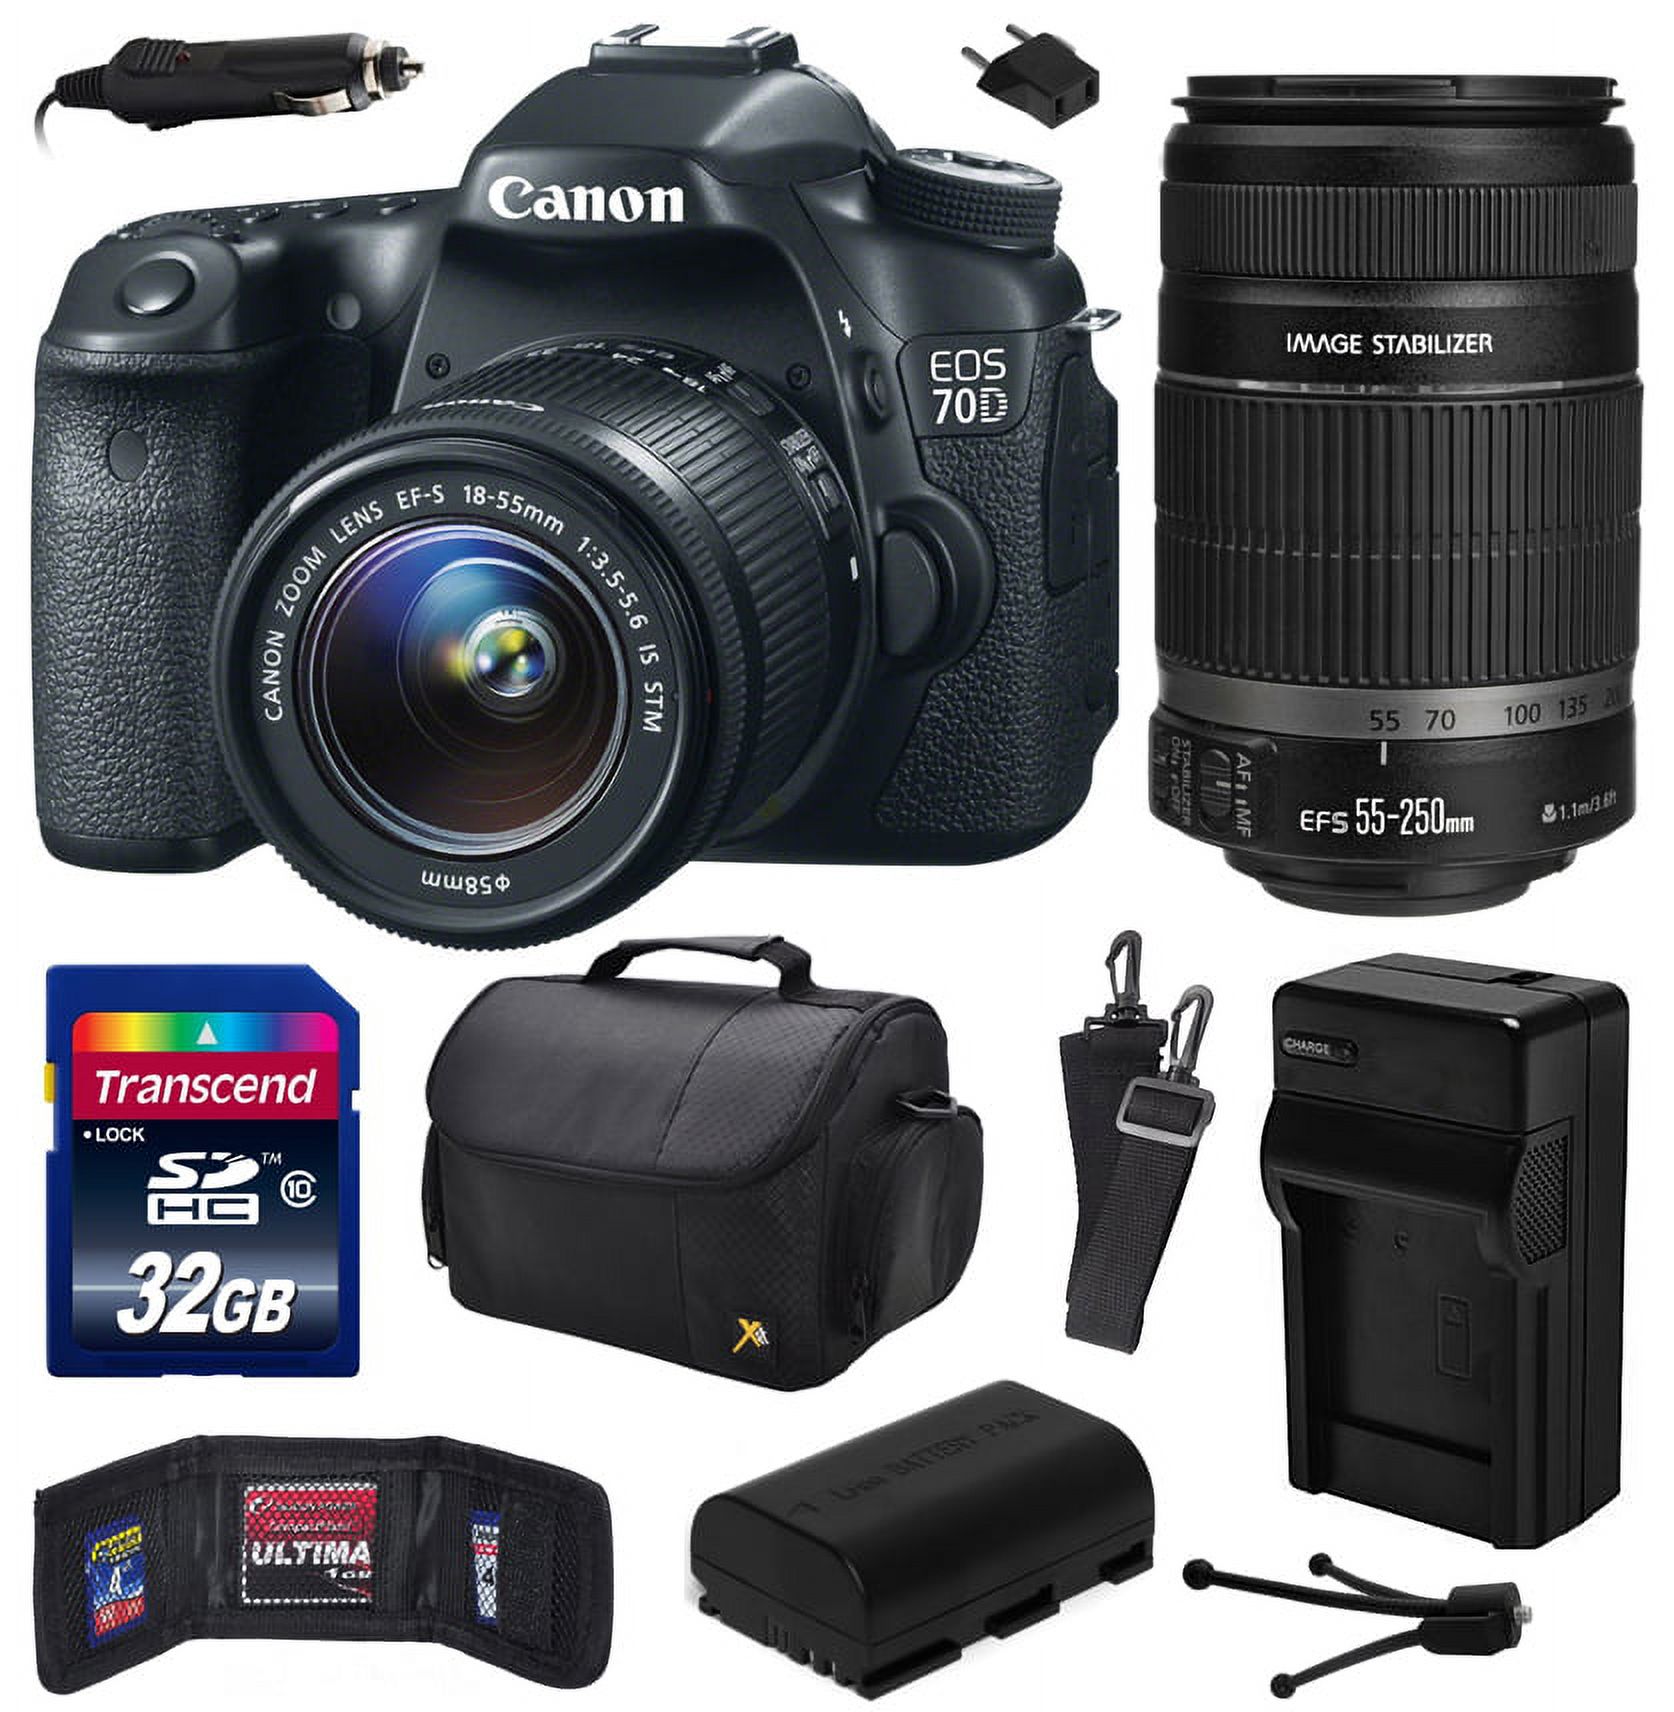 Canon EOS 70D Digital SLR Camera with 18-55mm STM and EF-S 55-250mm f/4-5.6 IS II Lens includes 32GB Memory + Large Case + Extra Battery + Travel Charger + Memory Card Wallet + Cleaning Kit 8469B009 - image 1 of 10